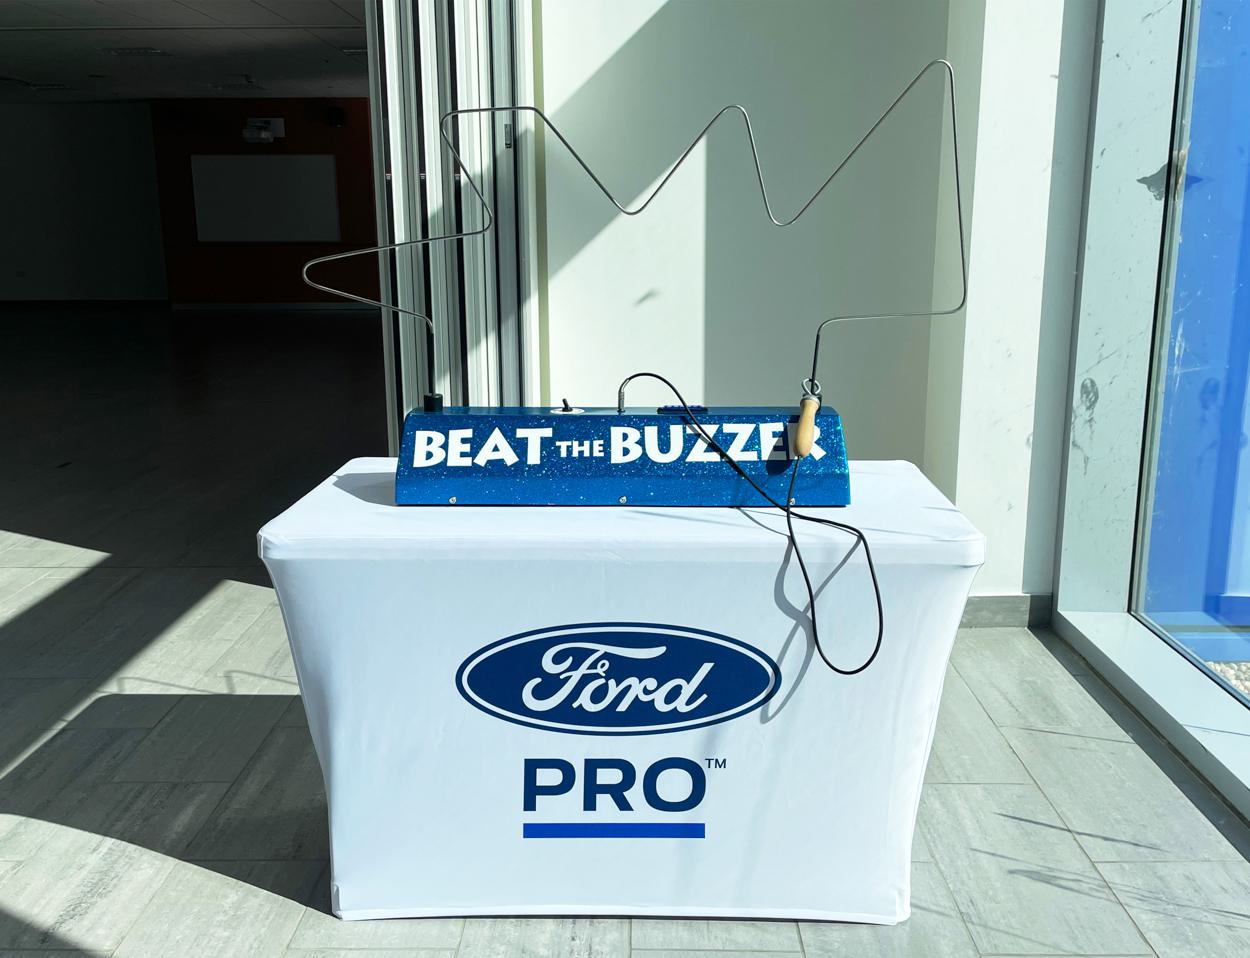 Beat the Buzzer Branding for Ford